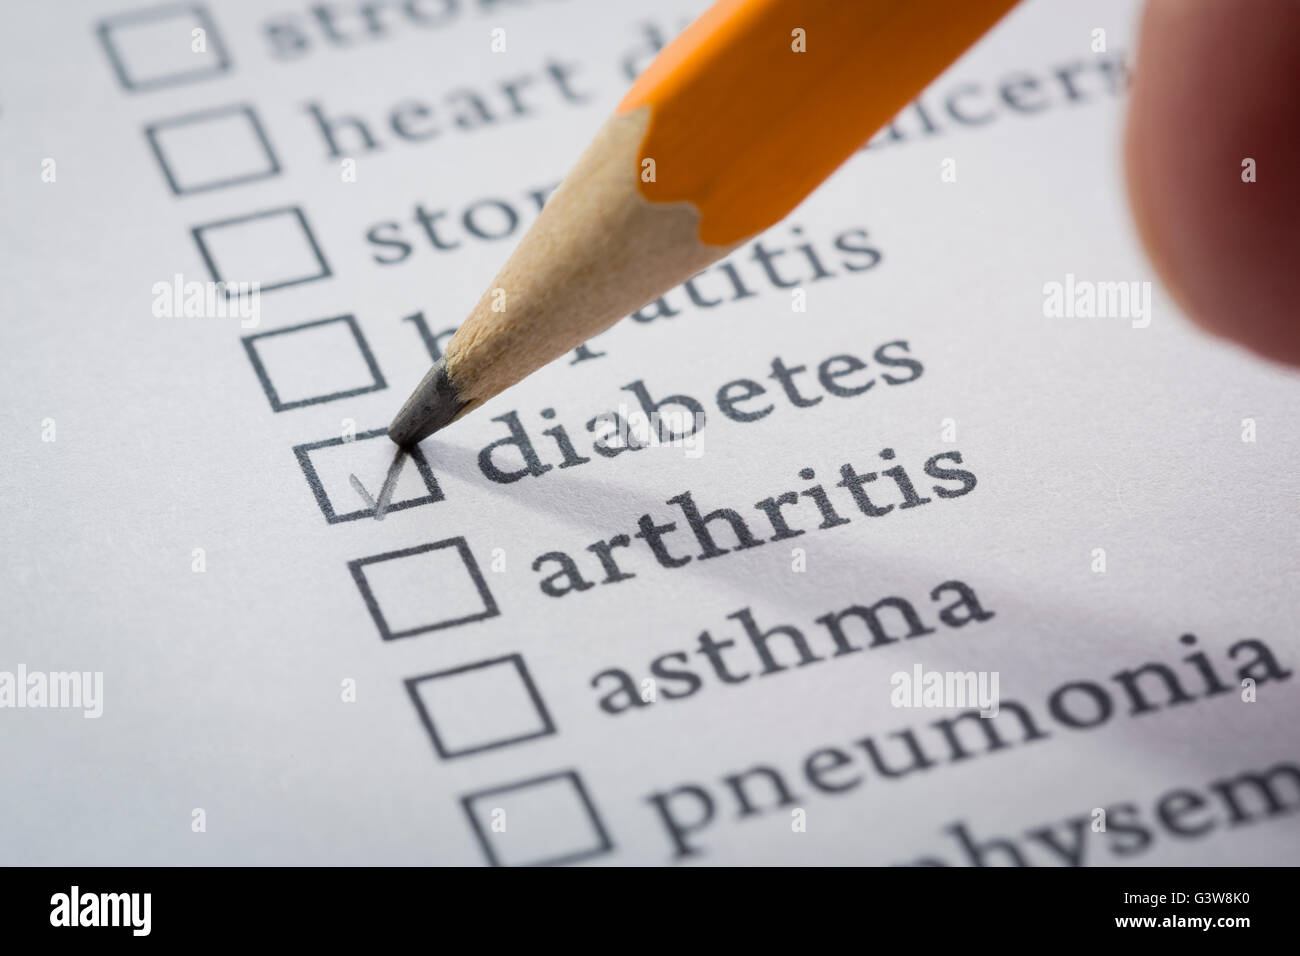 Pen checking out checkbox on list of diseases Stock Photo